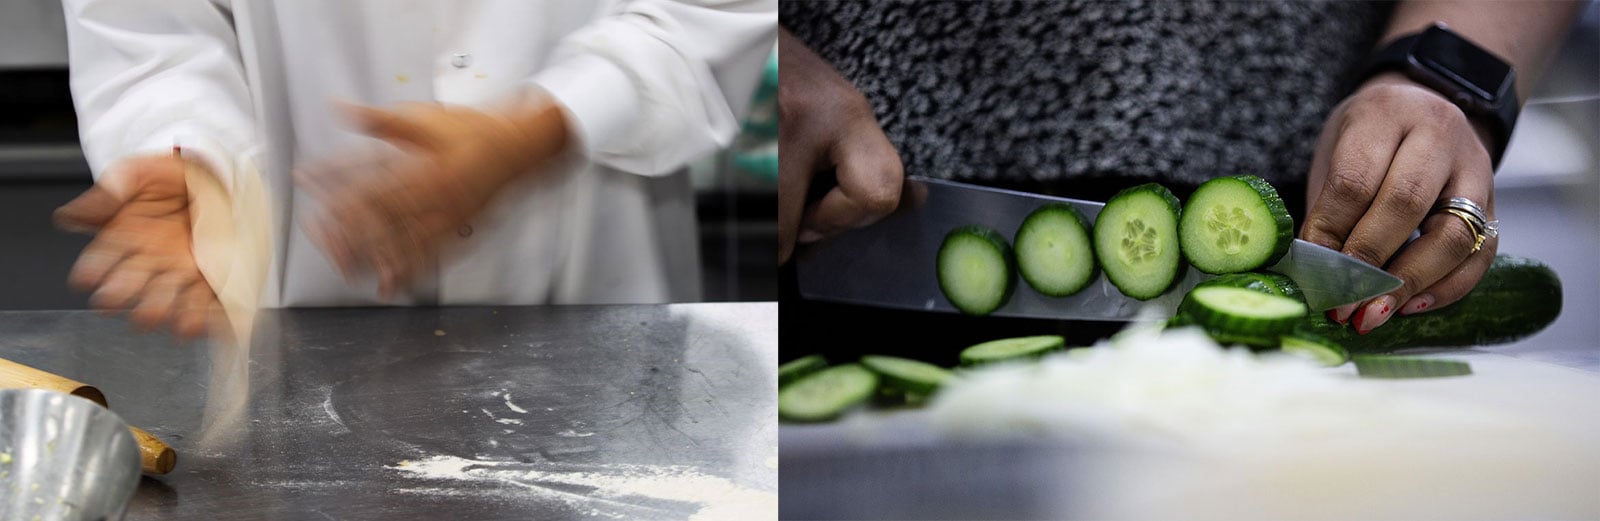 Two photos side by side. On the left, two blurred hands in motion, shaping roti dough. On the right, two hands slicing a cucumber with a kitchen knife.